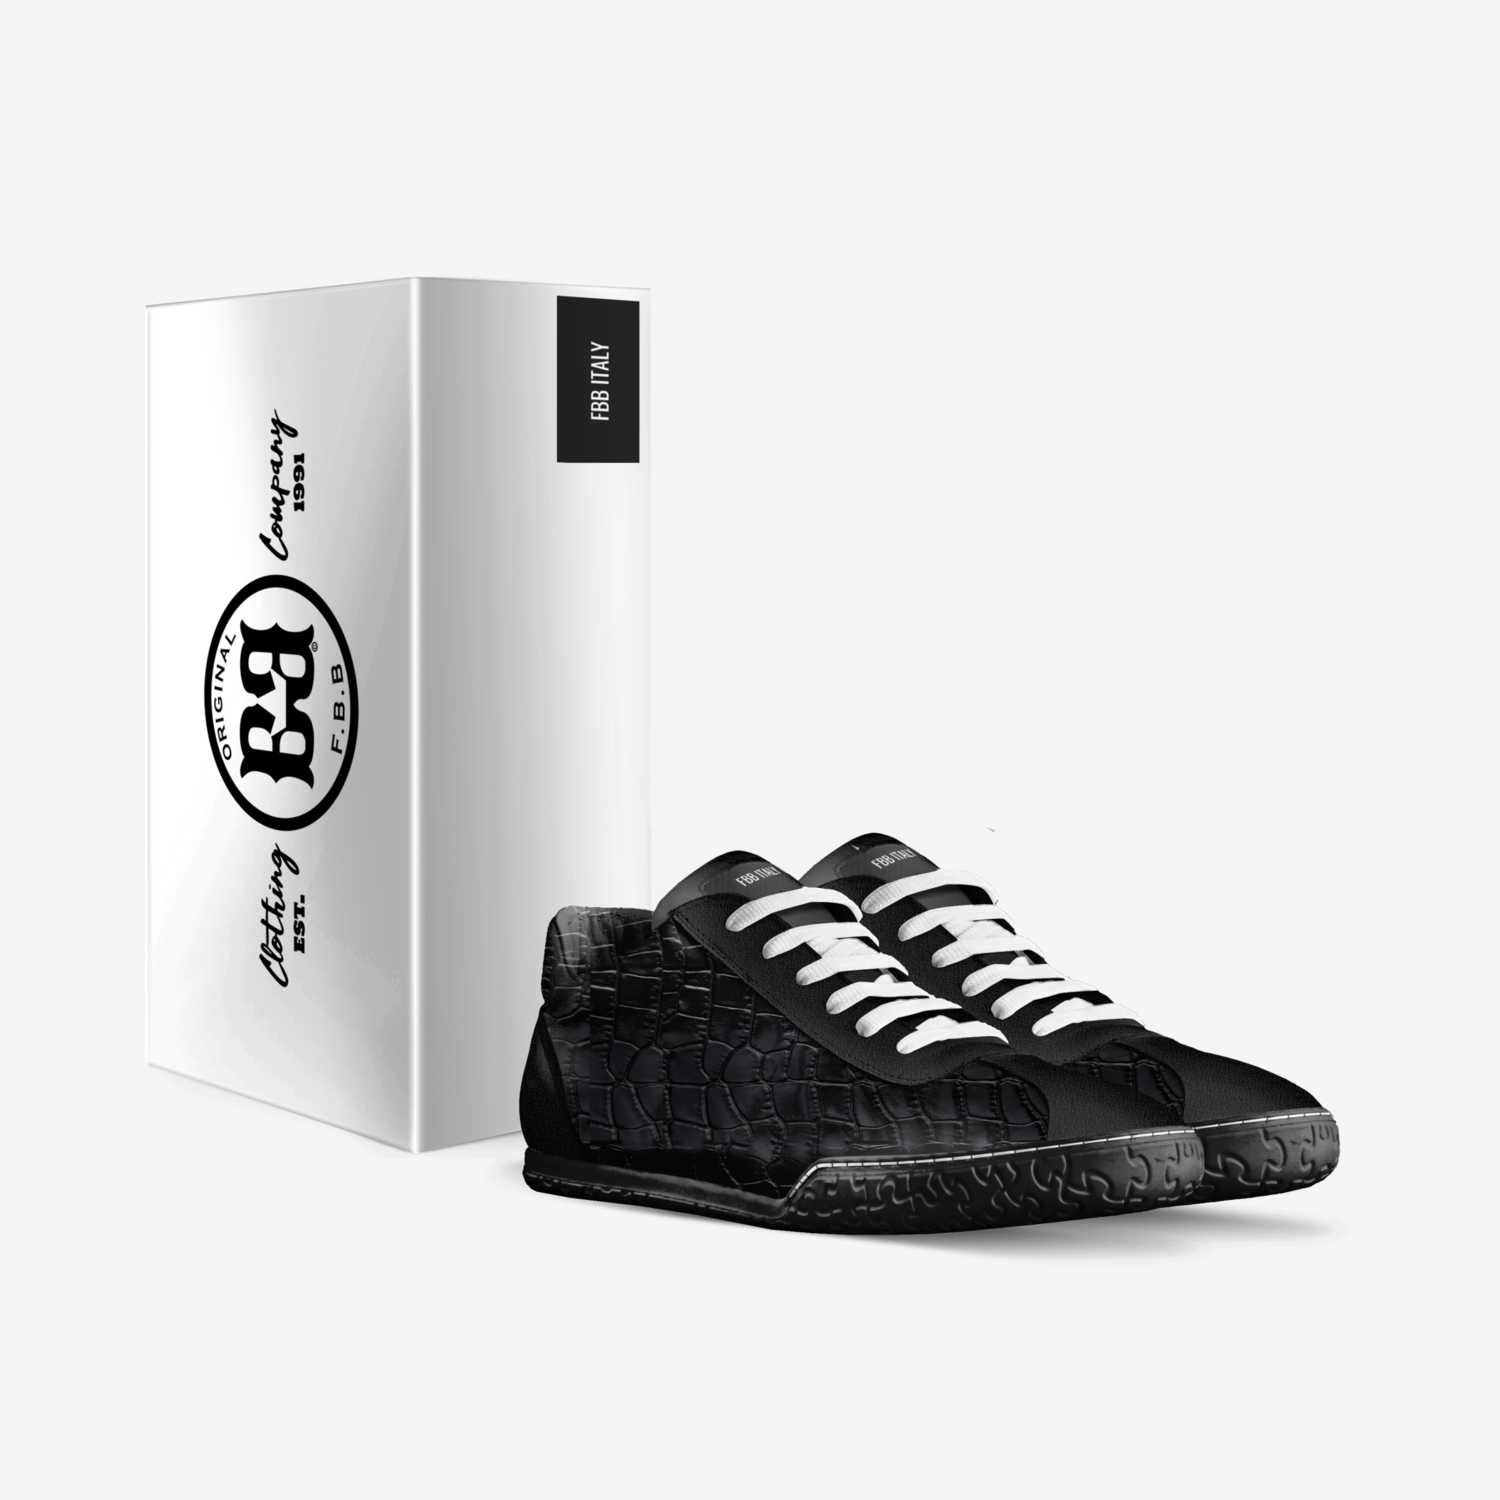 FBB ITALY custom made in Italy shoes by F. B. B. | Box view